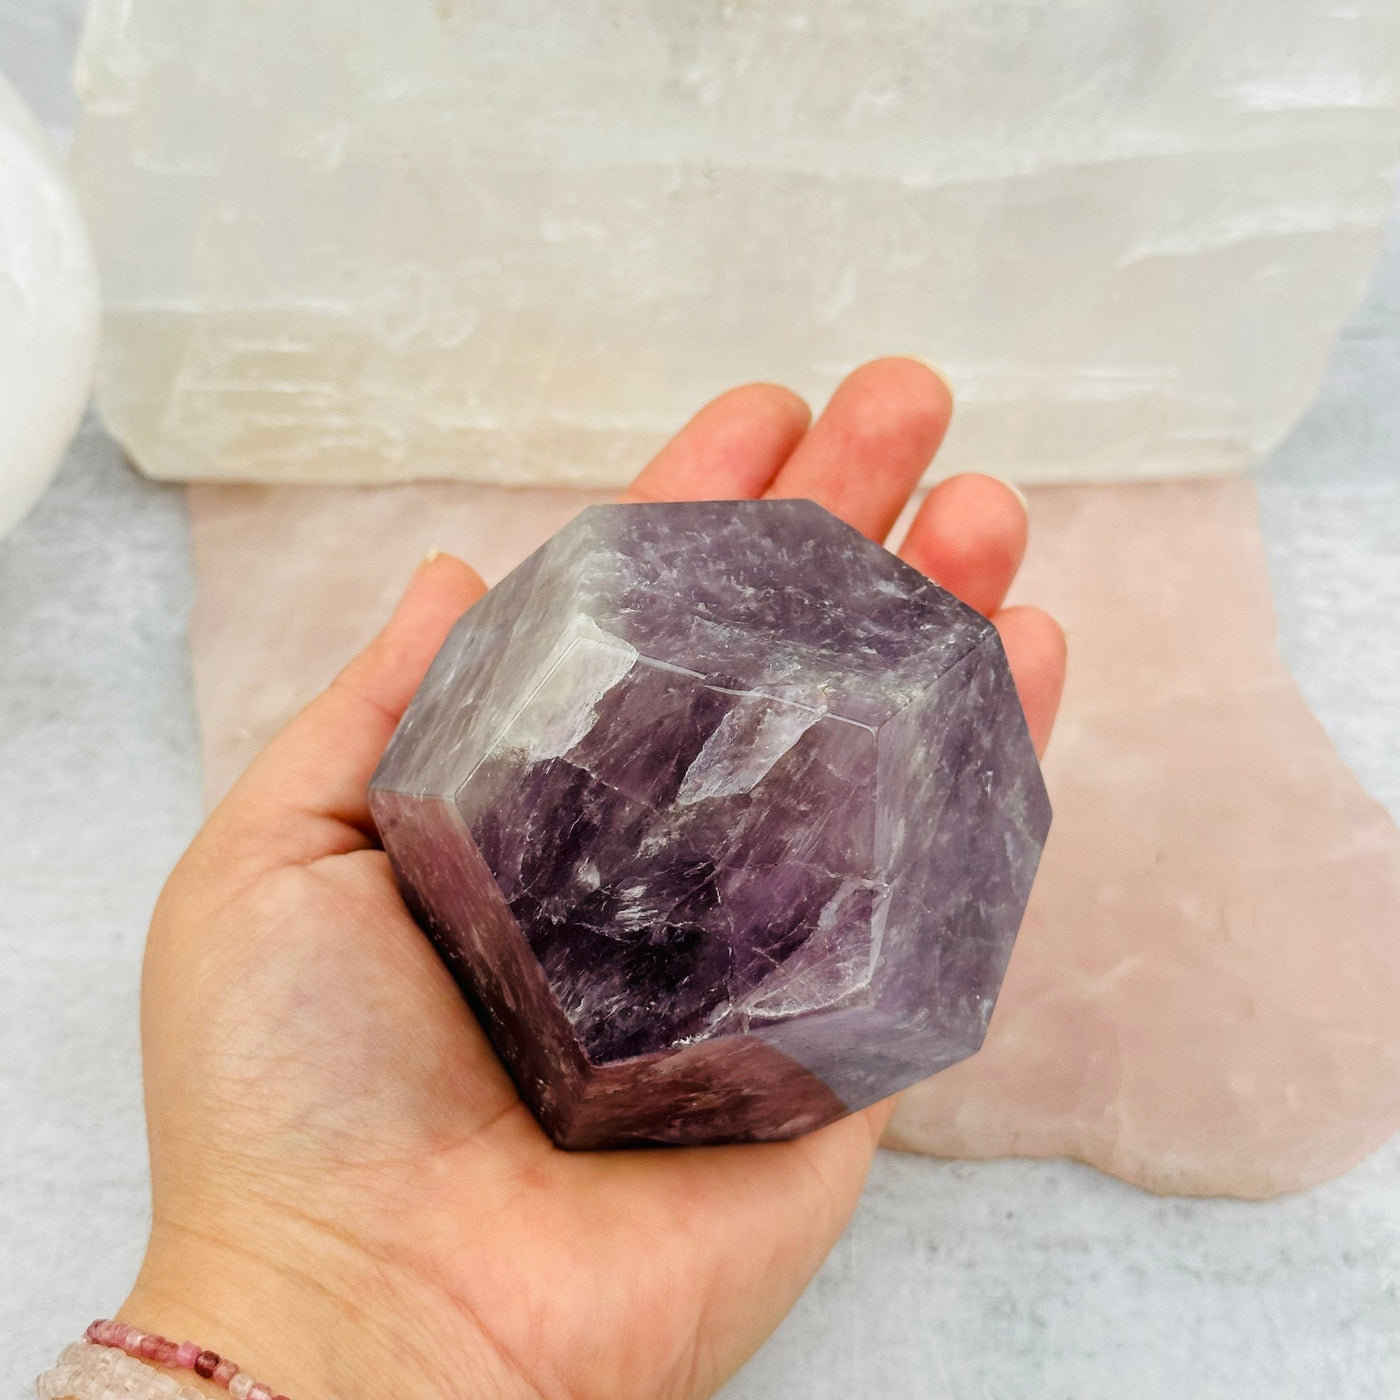 Amethyst Crystal Dodecahedron in hand for size reference 